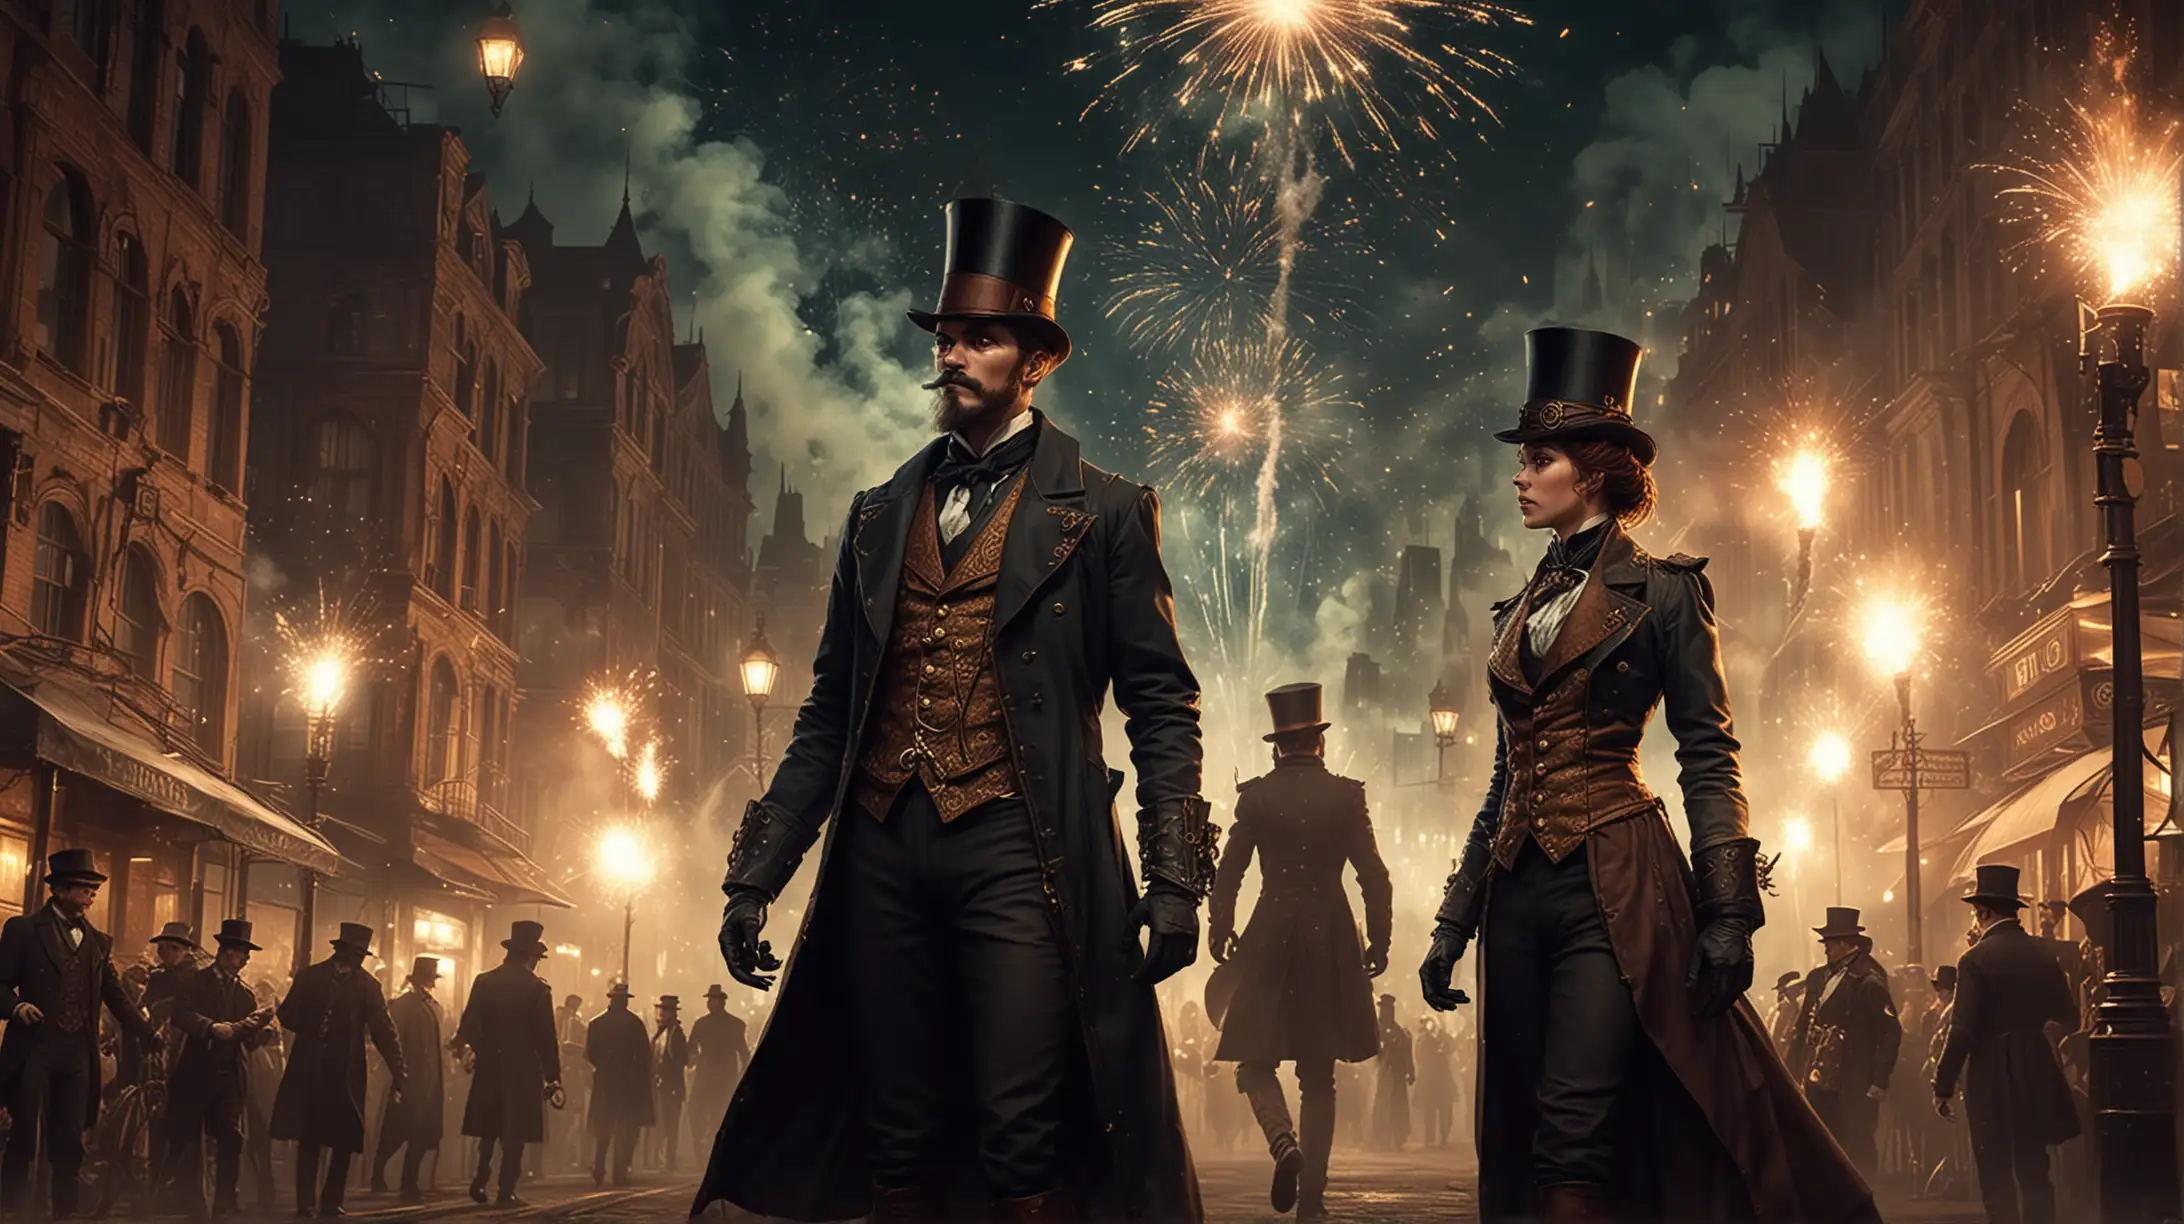 Steampunk City Night Fireworks Spectacle with VictorianDressed Citizens